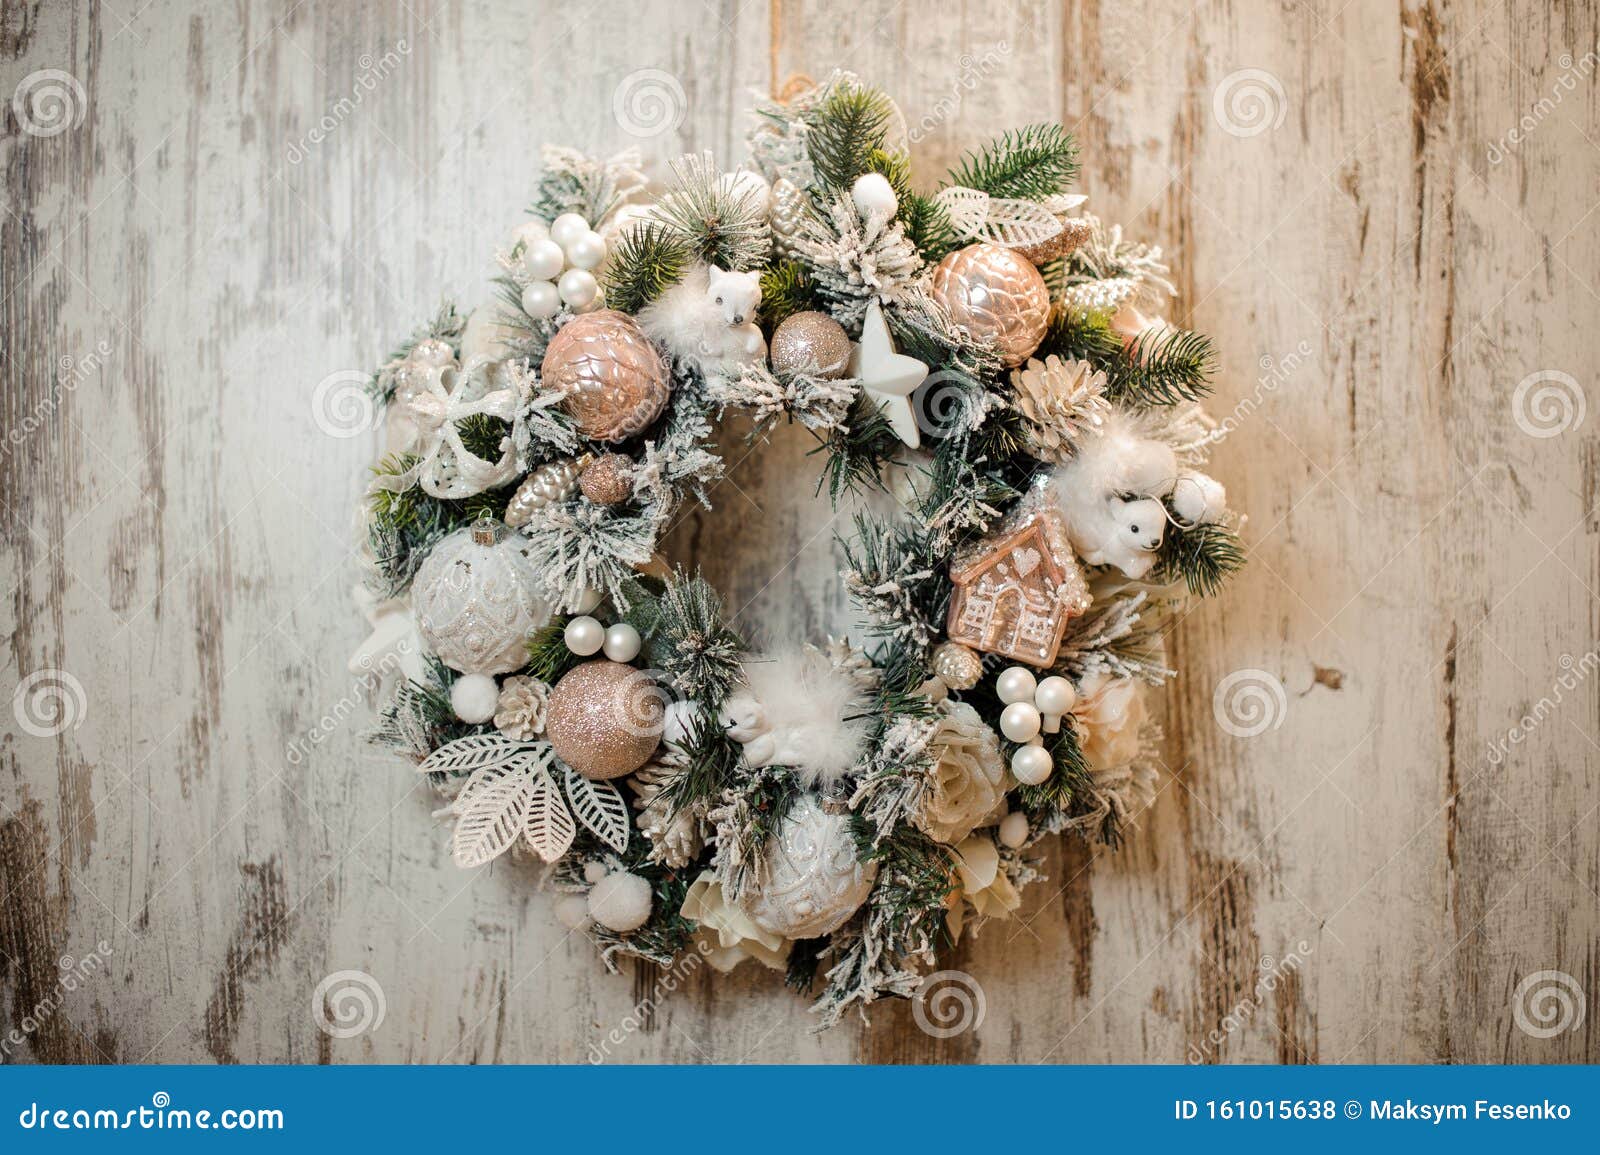 christmas artificial wreath with white and rosa color toys, balls, tapes and flowers